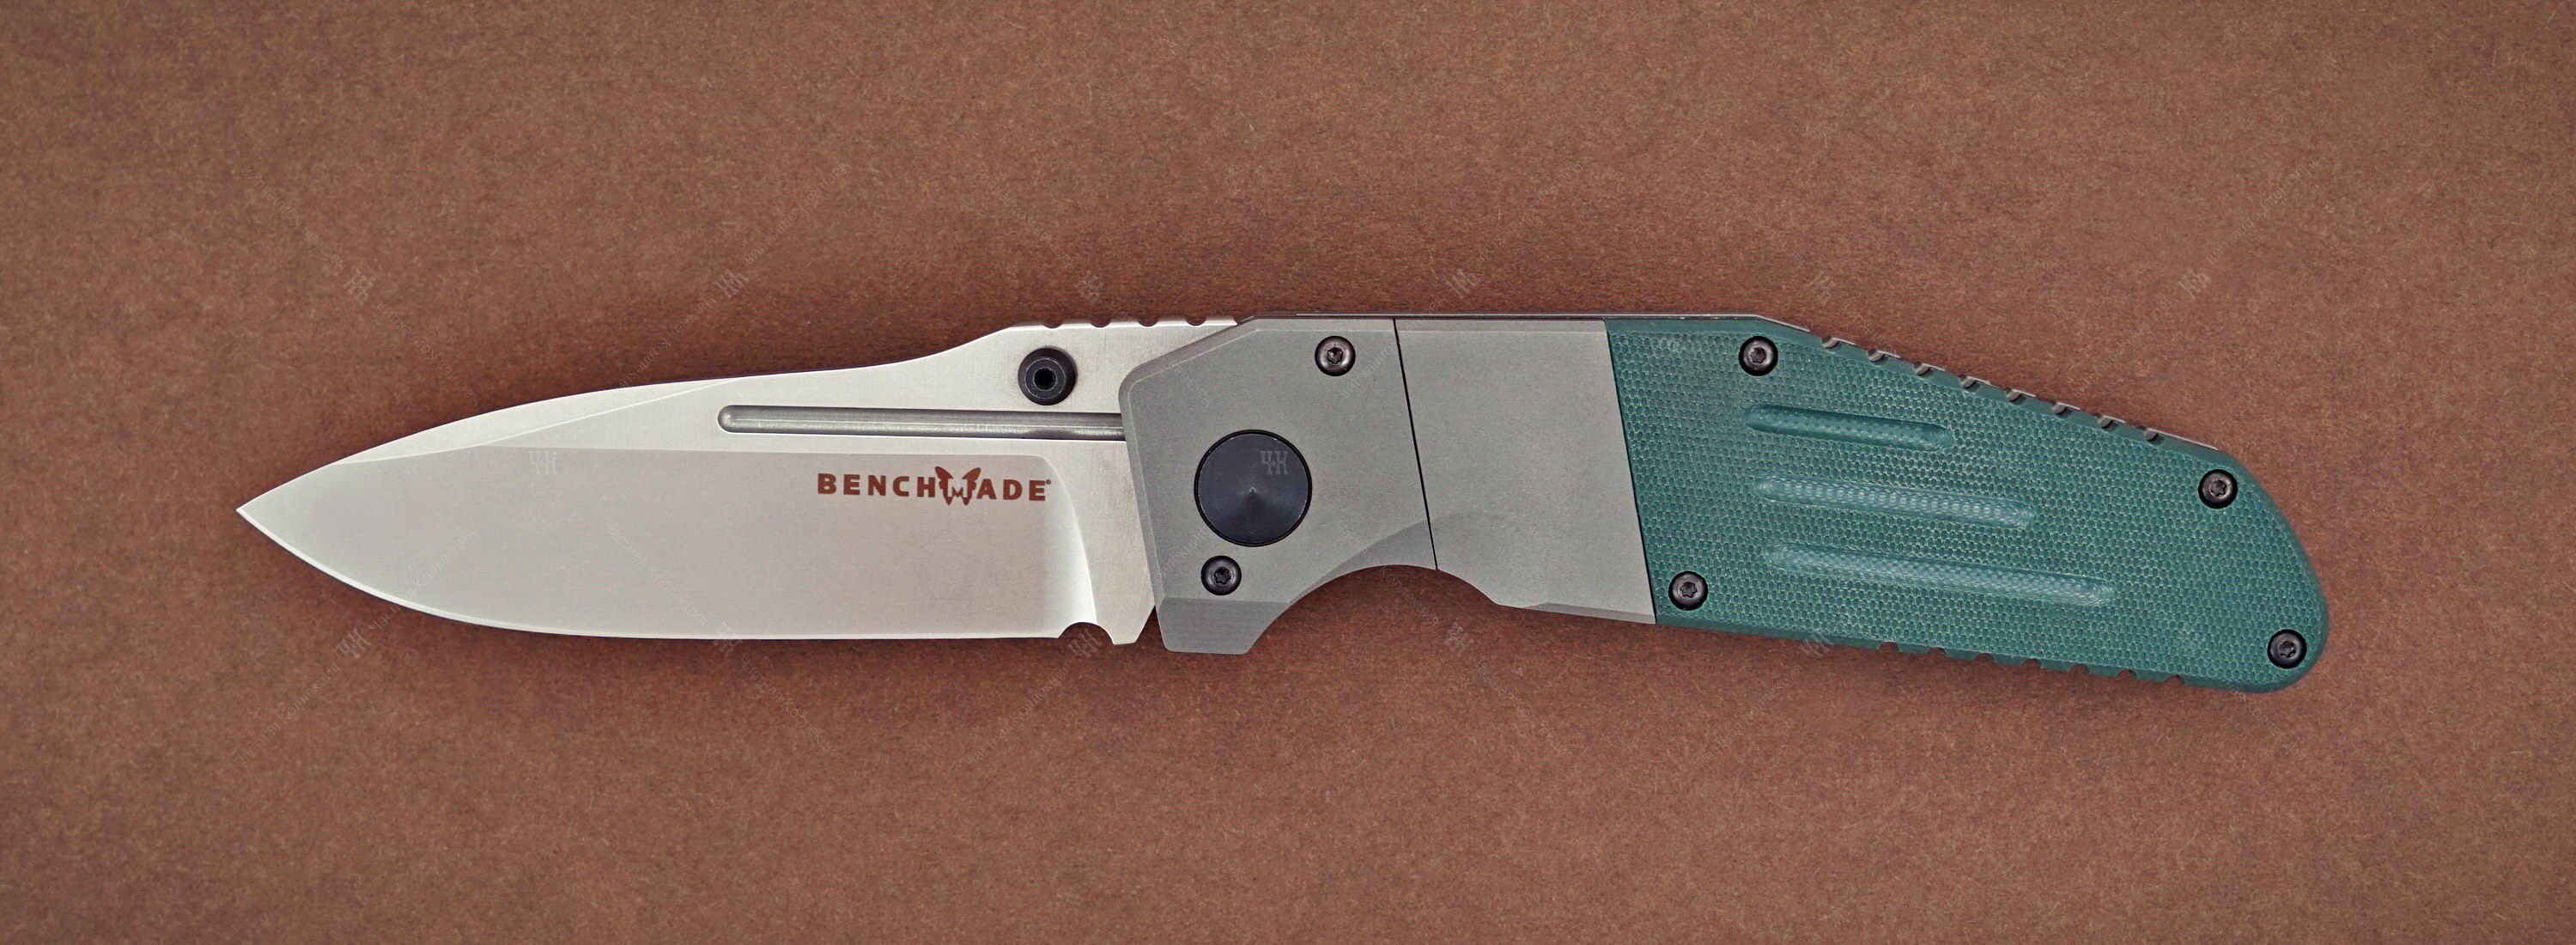 benchmade gold class